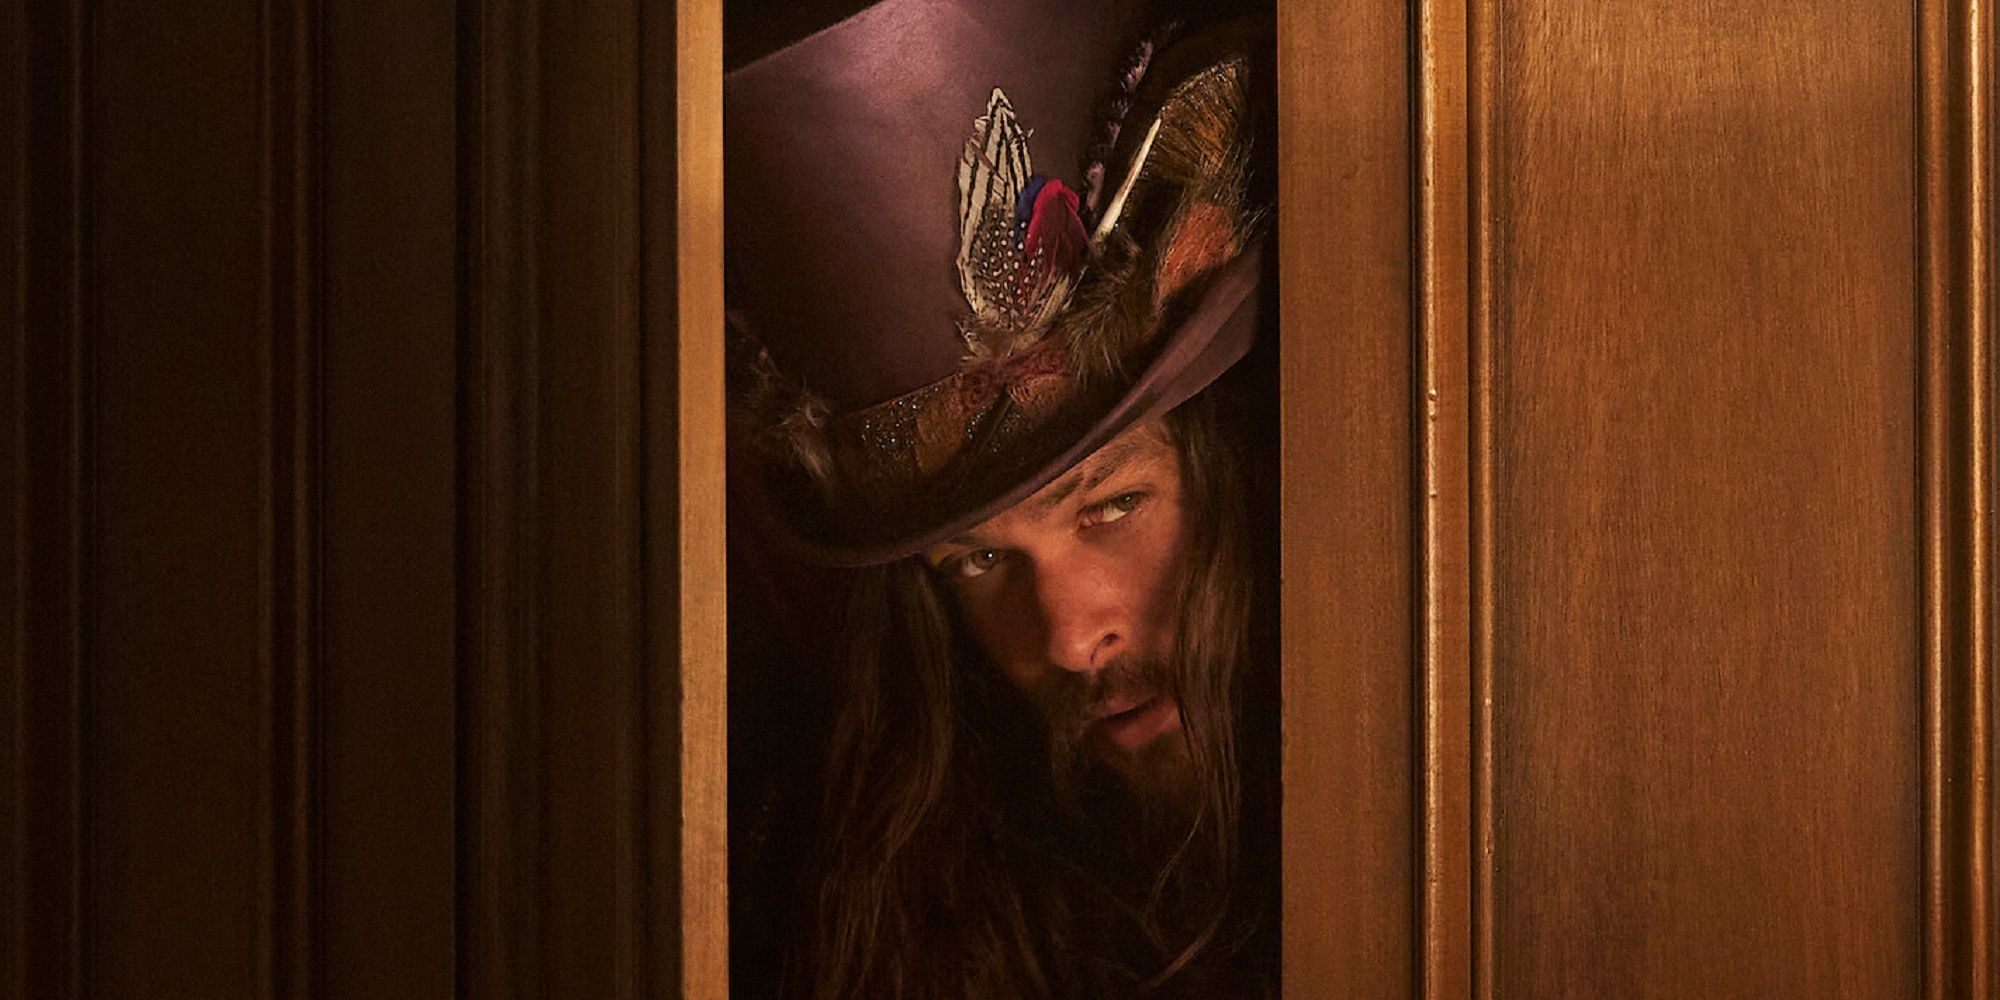 Jason Momoa as Flip, wearing a fancy top hat and looking out from behind a door in 'Slumberland.'